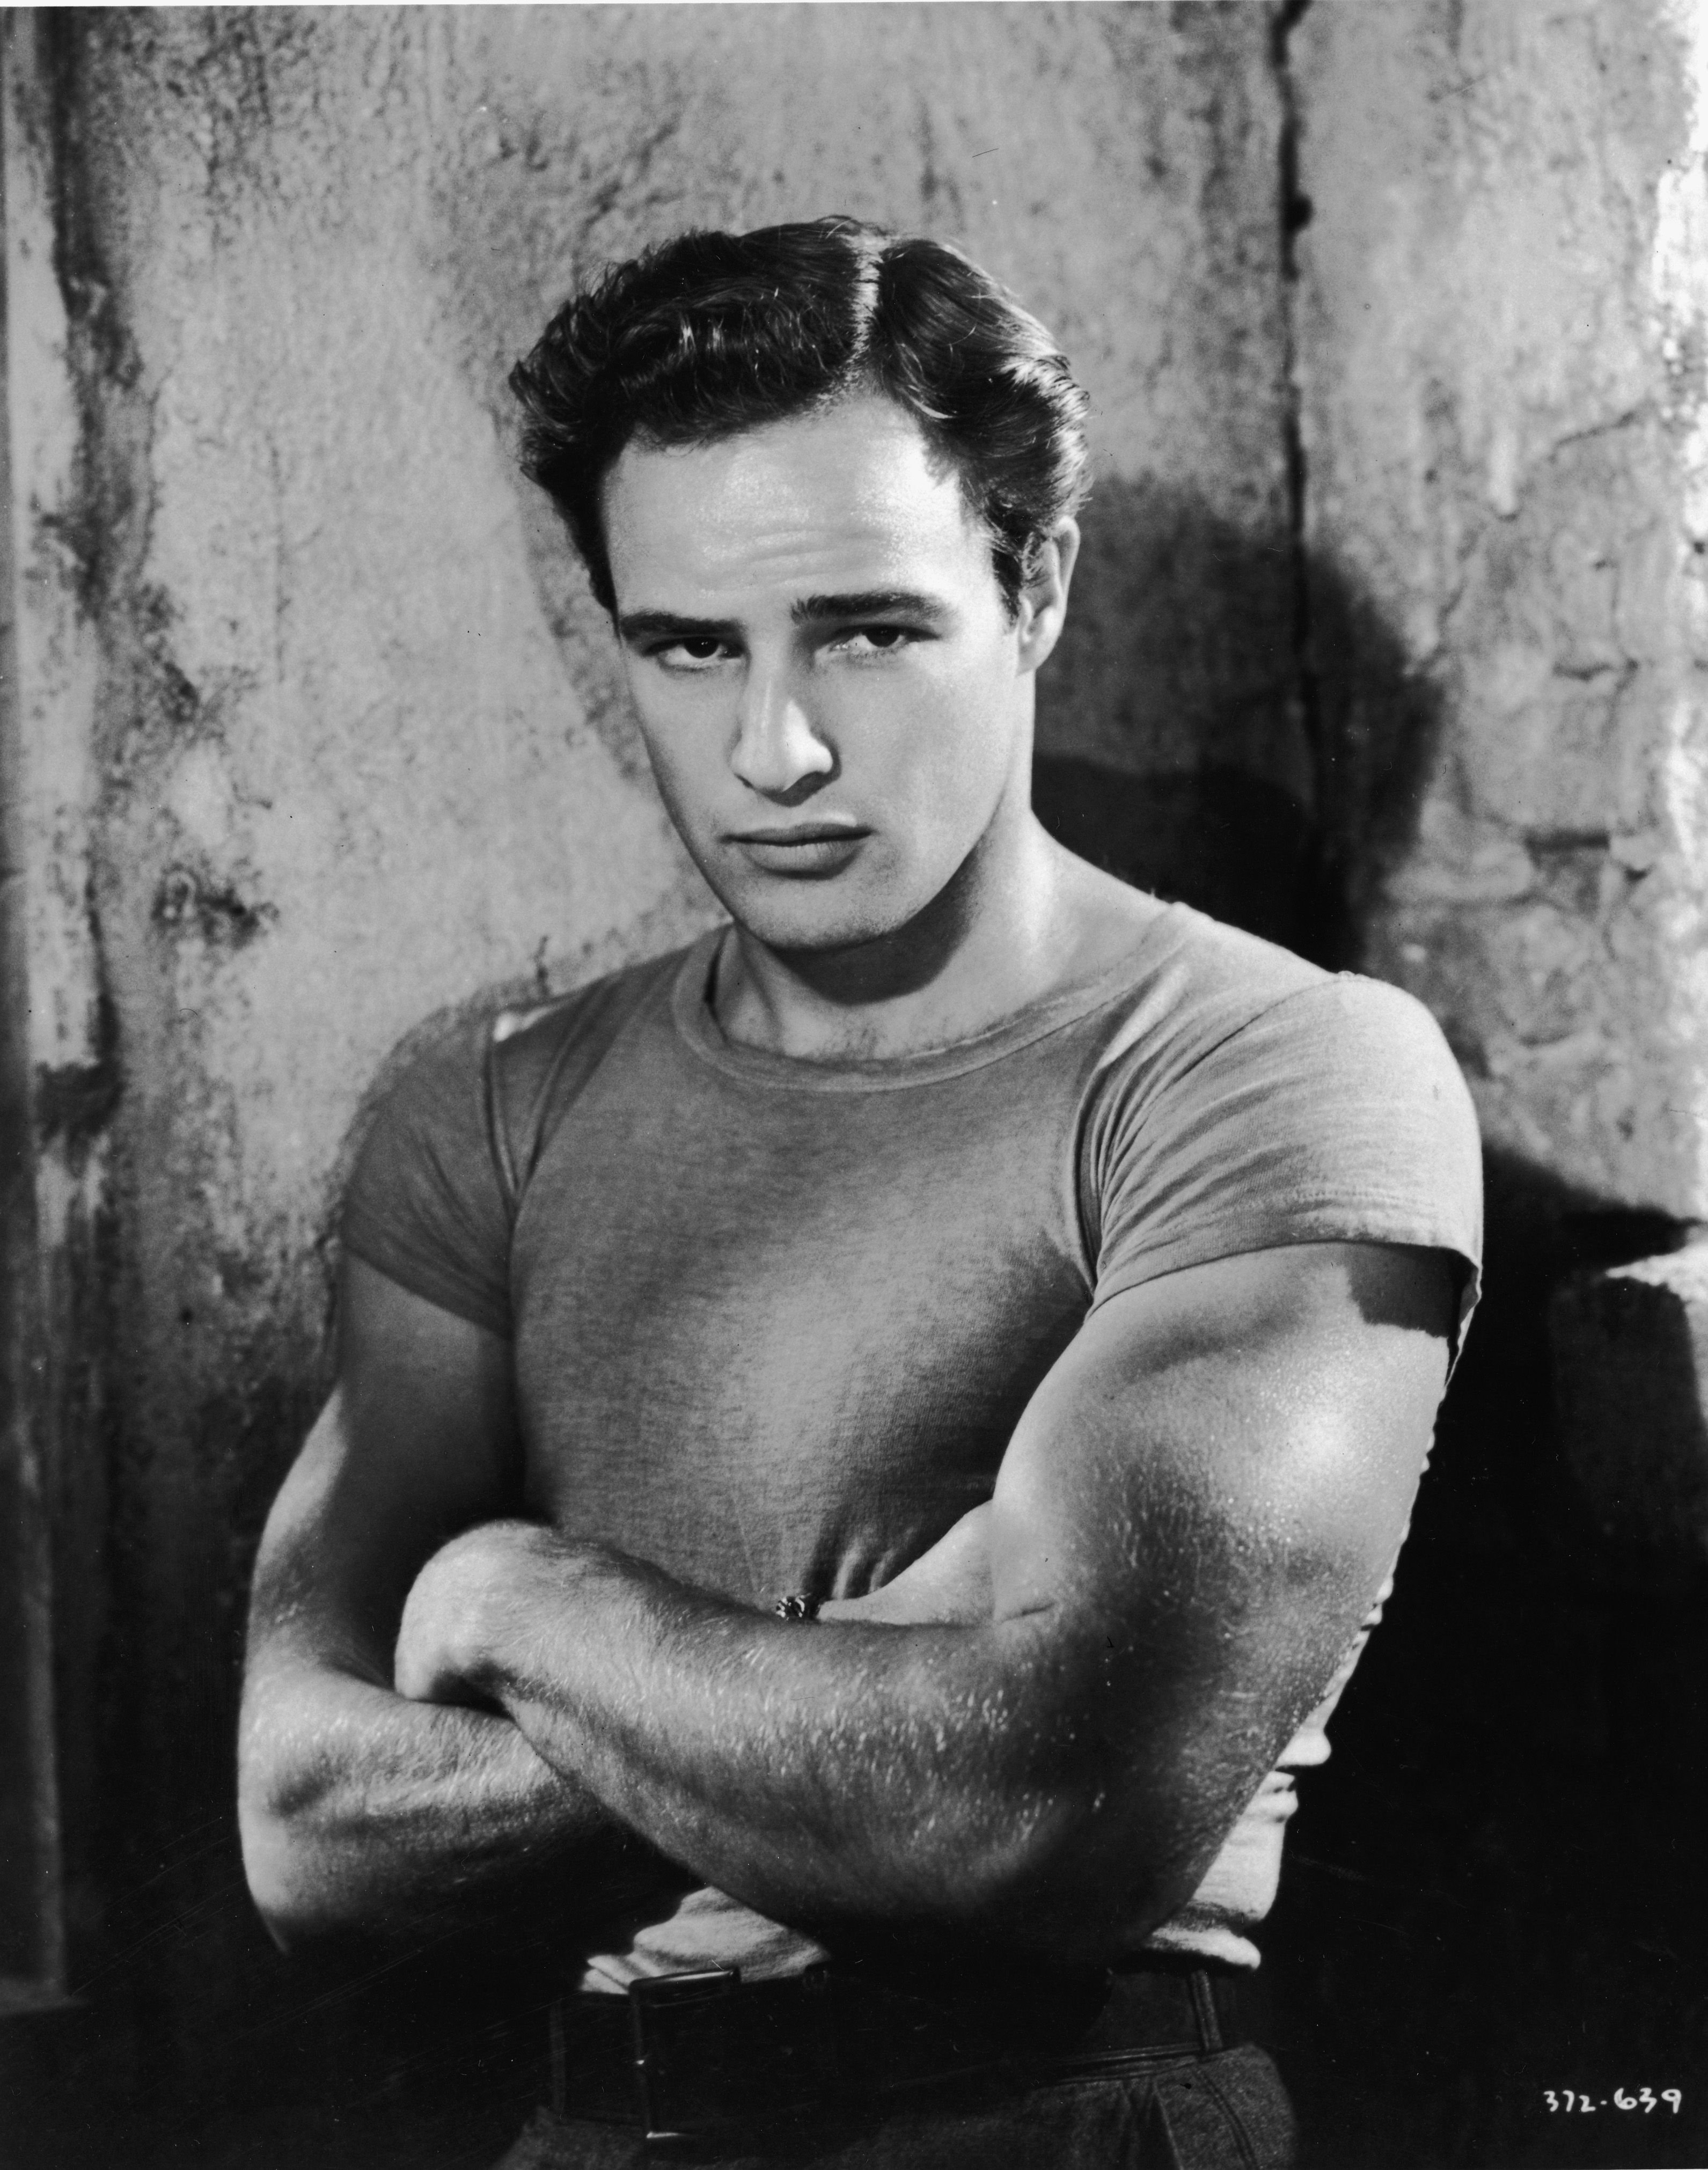 Marlon Brando with his arms folded, circa 1951. | Source: Getty Images